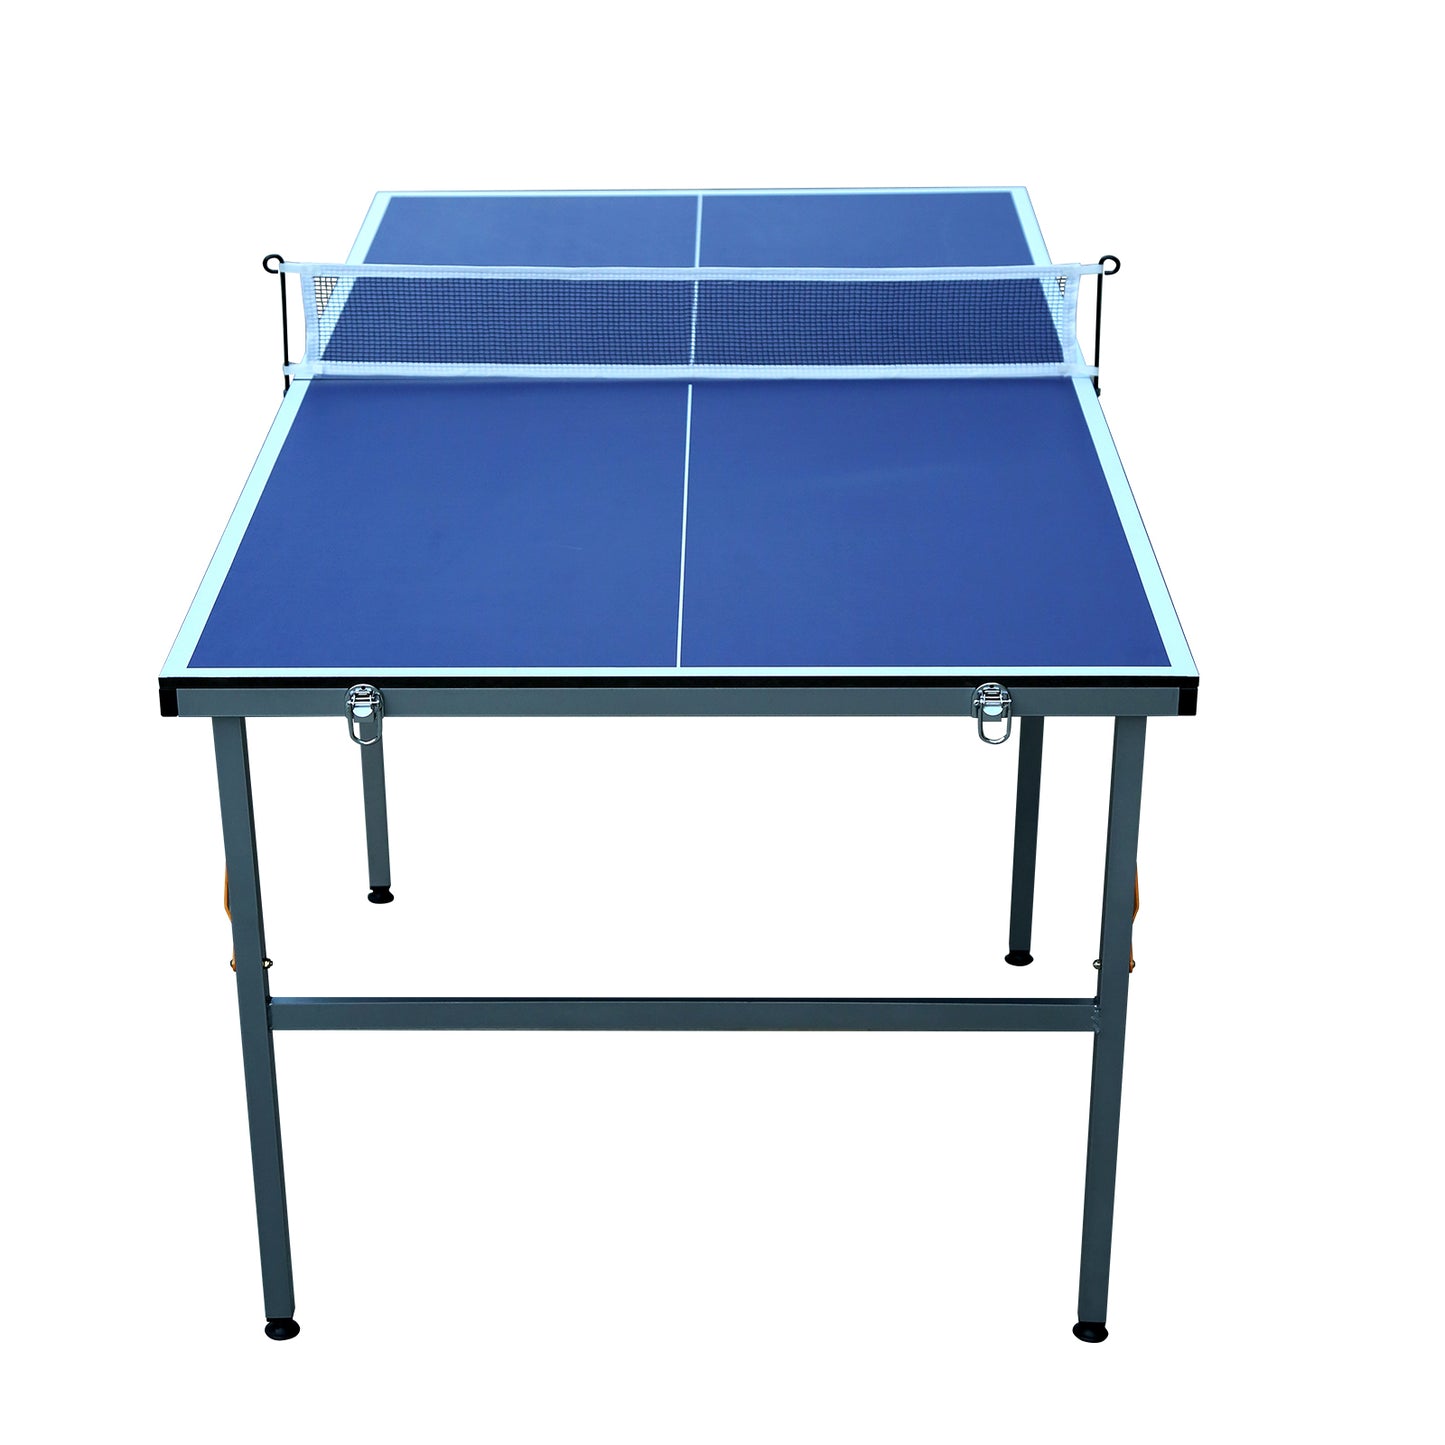 6ft Mid-Size Table Tennis Table Foldable & Portable Ping Pong Table Set for Indoor & Outdoor Games with Net, 2 Table Tennis Paddles and 3 Balls